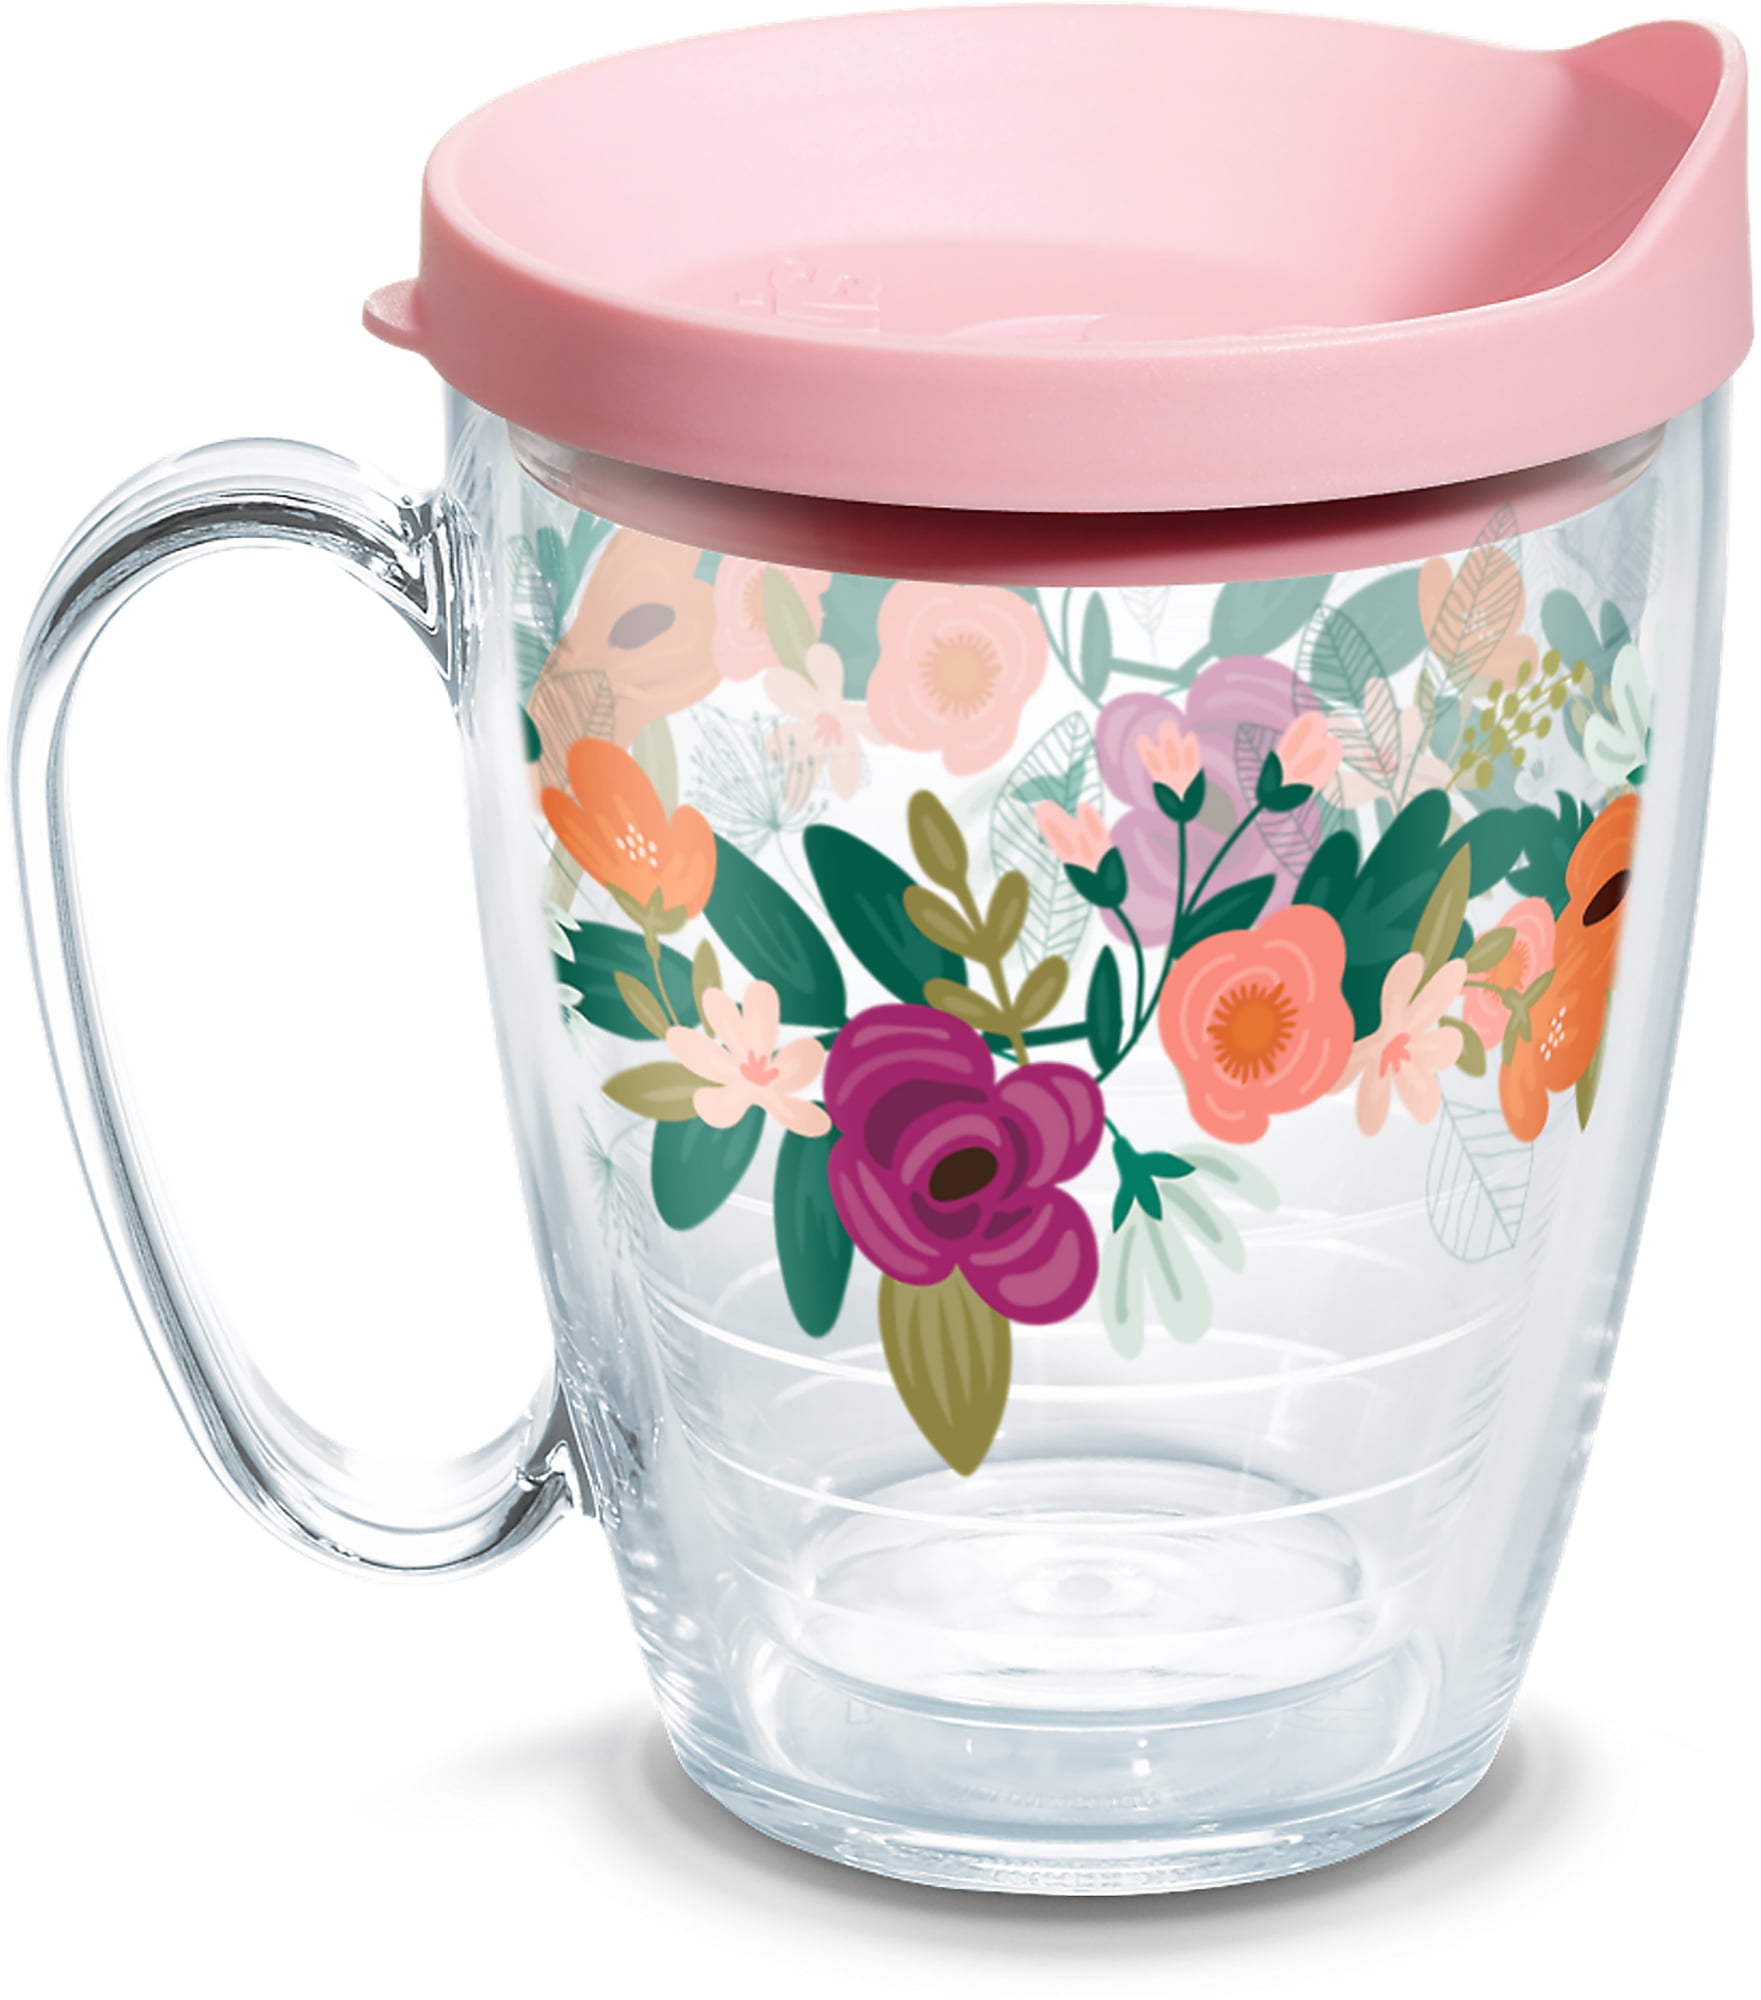 Tervis Neo Mint Floral Made in USA Double Walled Insulated Tumbler Travel  Cup Keeps Drinks Cold & Hot, 16oz Mug, Classic